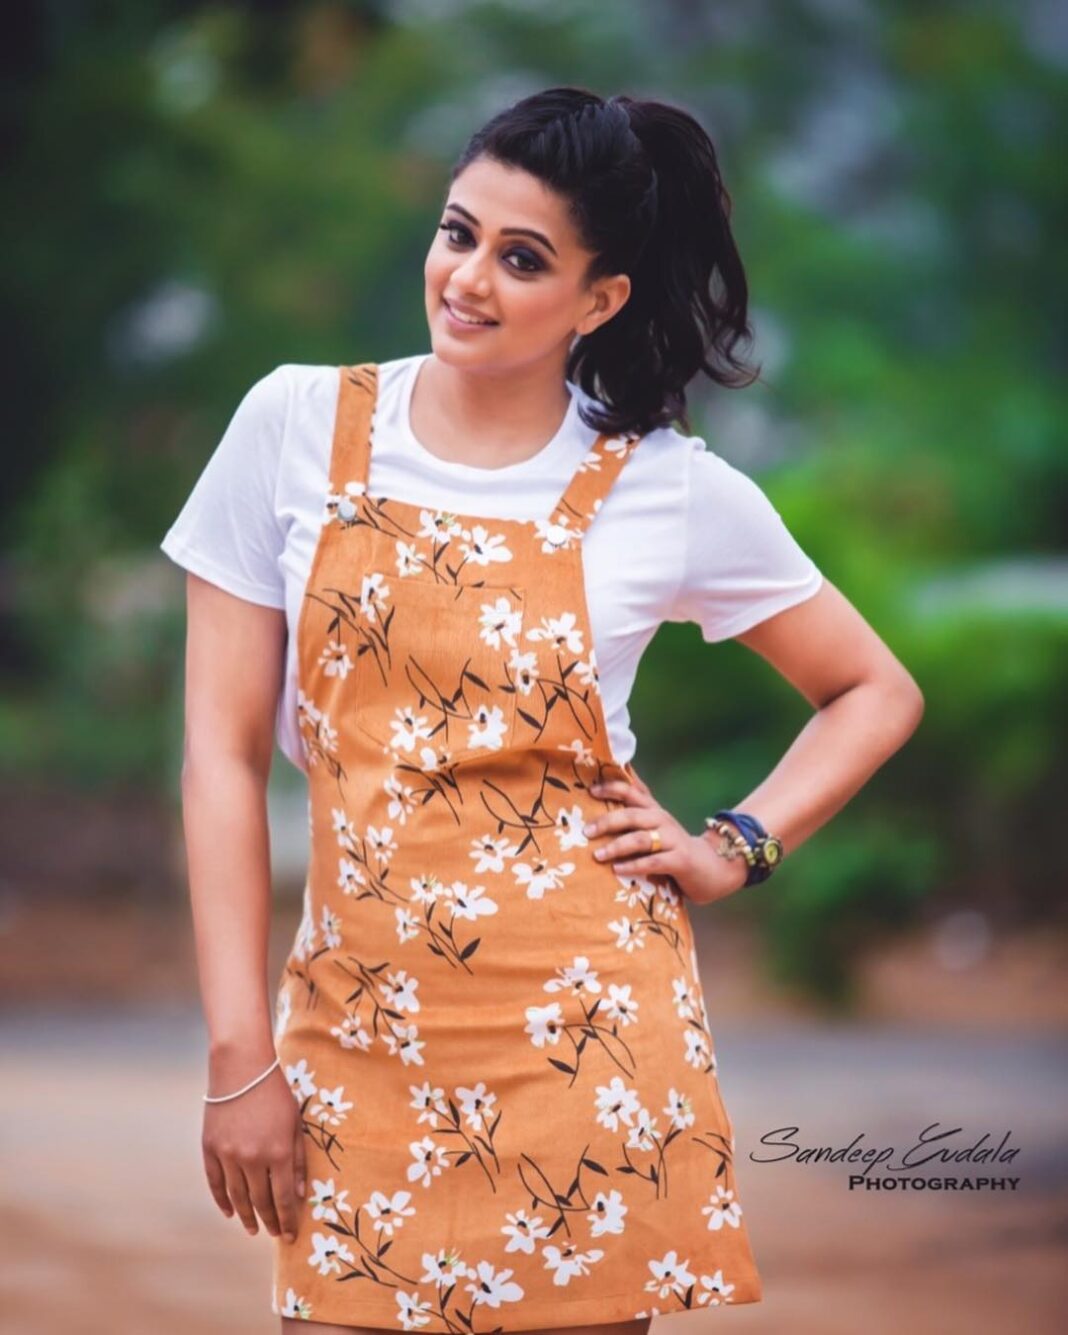 Priyamani Instagram - Wearing this super cute dungarees dress by @sheinofficial ..styled by my one and only louuuuu @mehekshetty ❤️ ...pictures courtesy the super talented @sandeepgudalaphotography 🤗😘.. makeup and hairstyle by my favourites @pradeep_makeup and @shobhahawale ❤️ #dheejodi #etv #superfunepisode #dontmissit # Nanakramguda, Andhra Pradesh, India